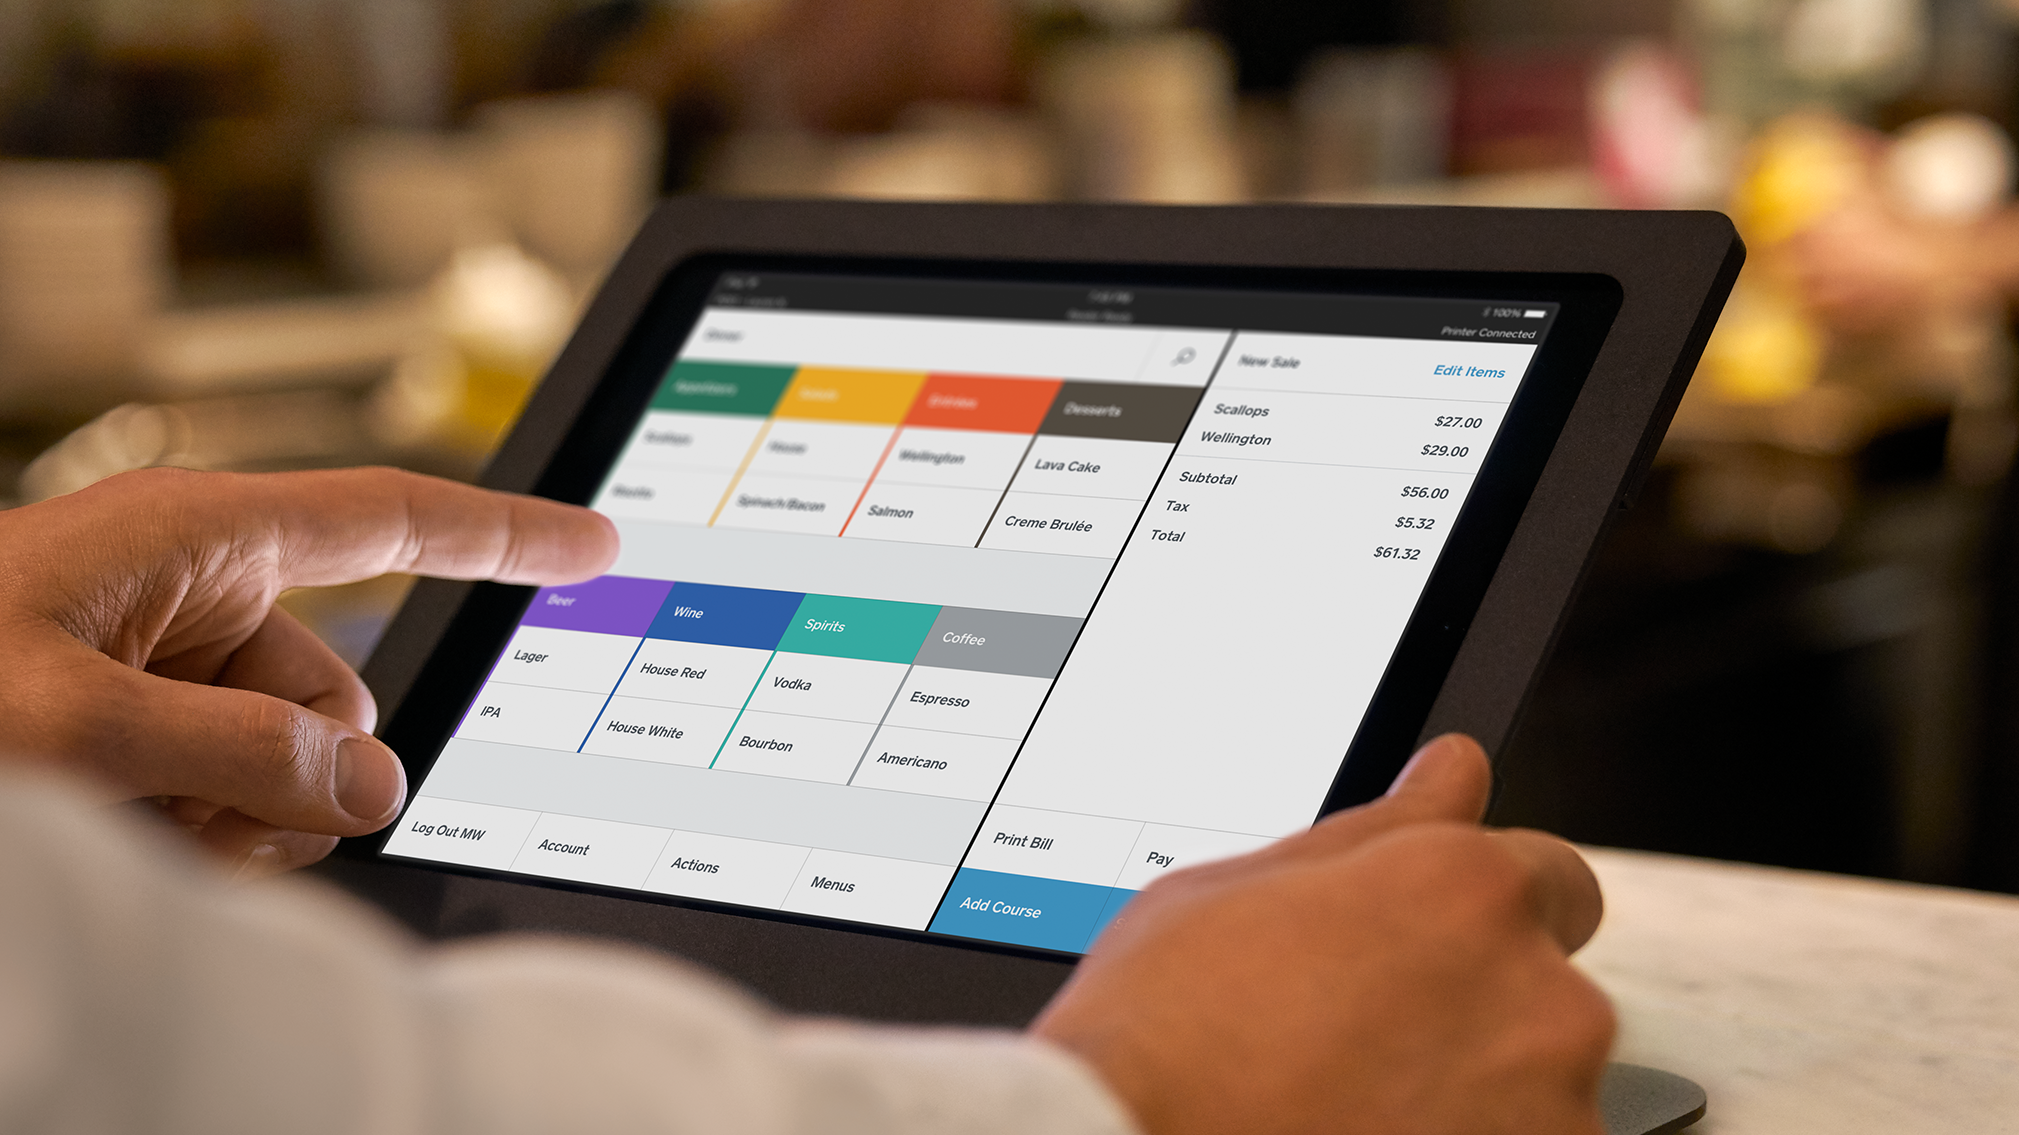 Point of sale terminal for restaurant